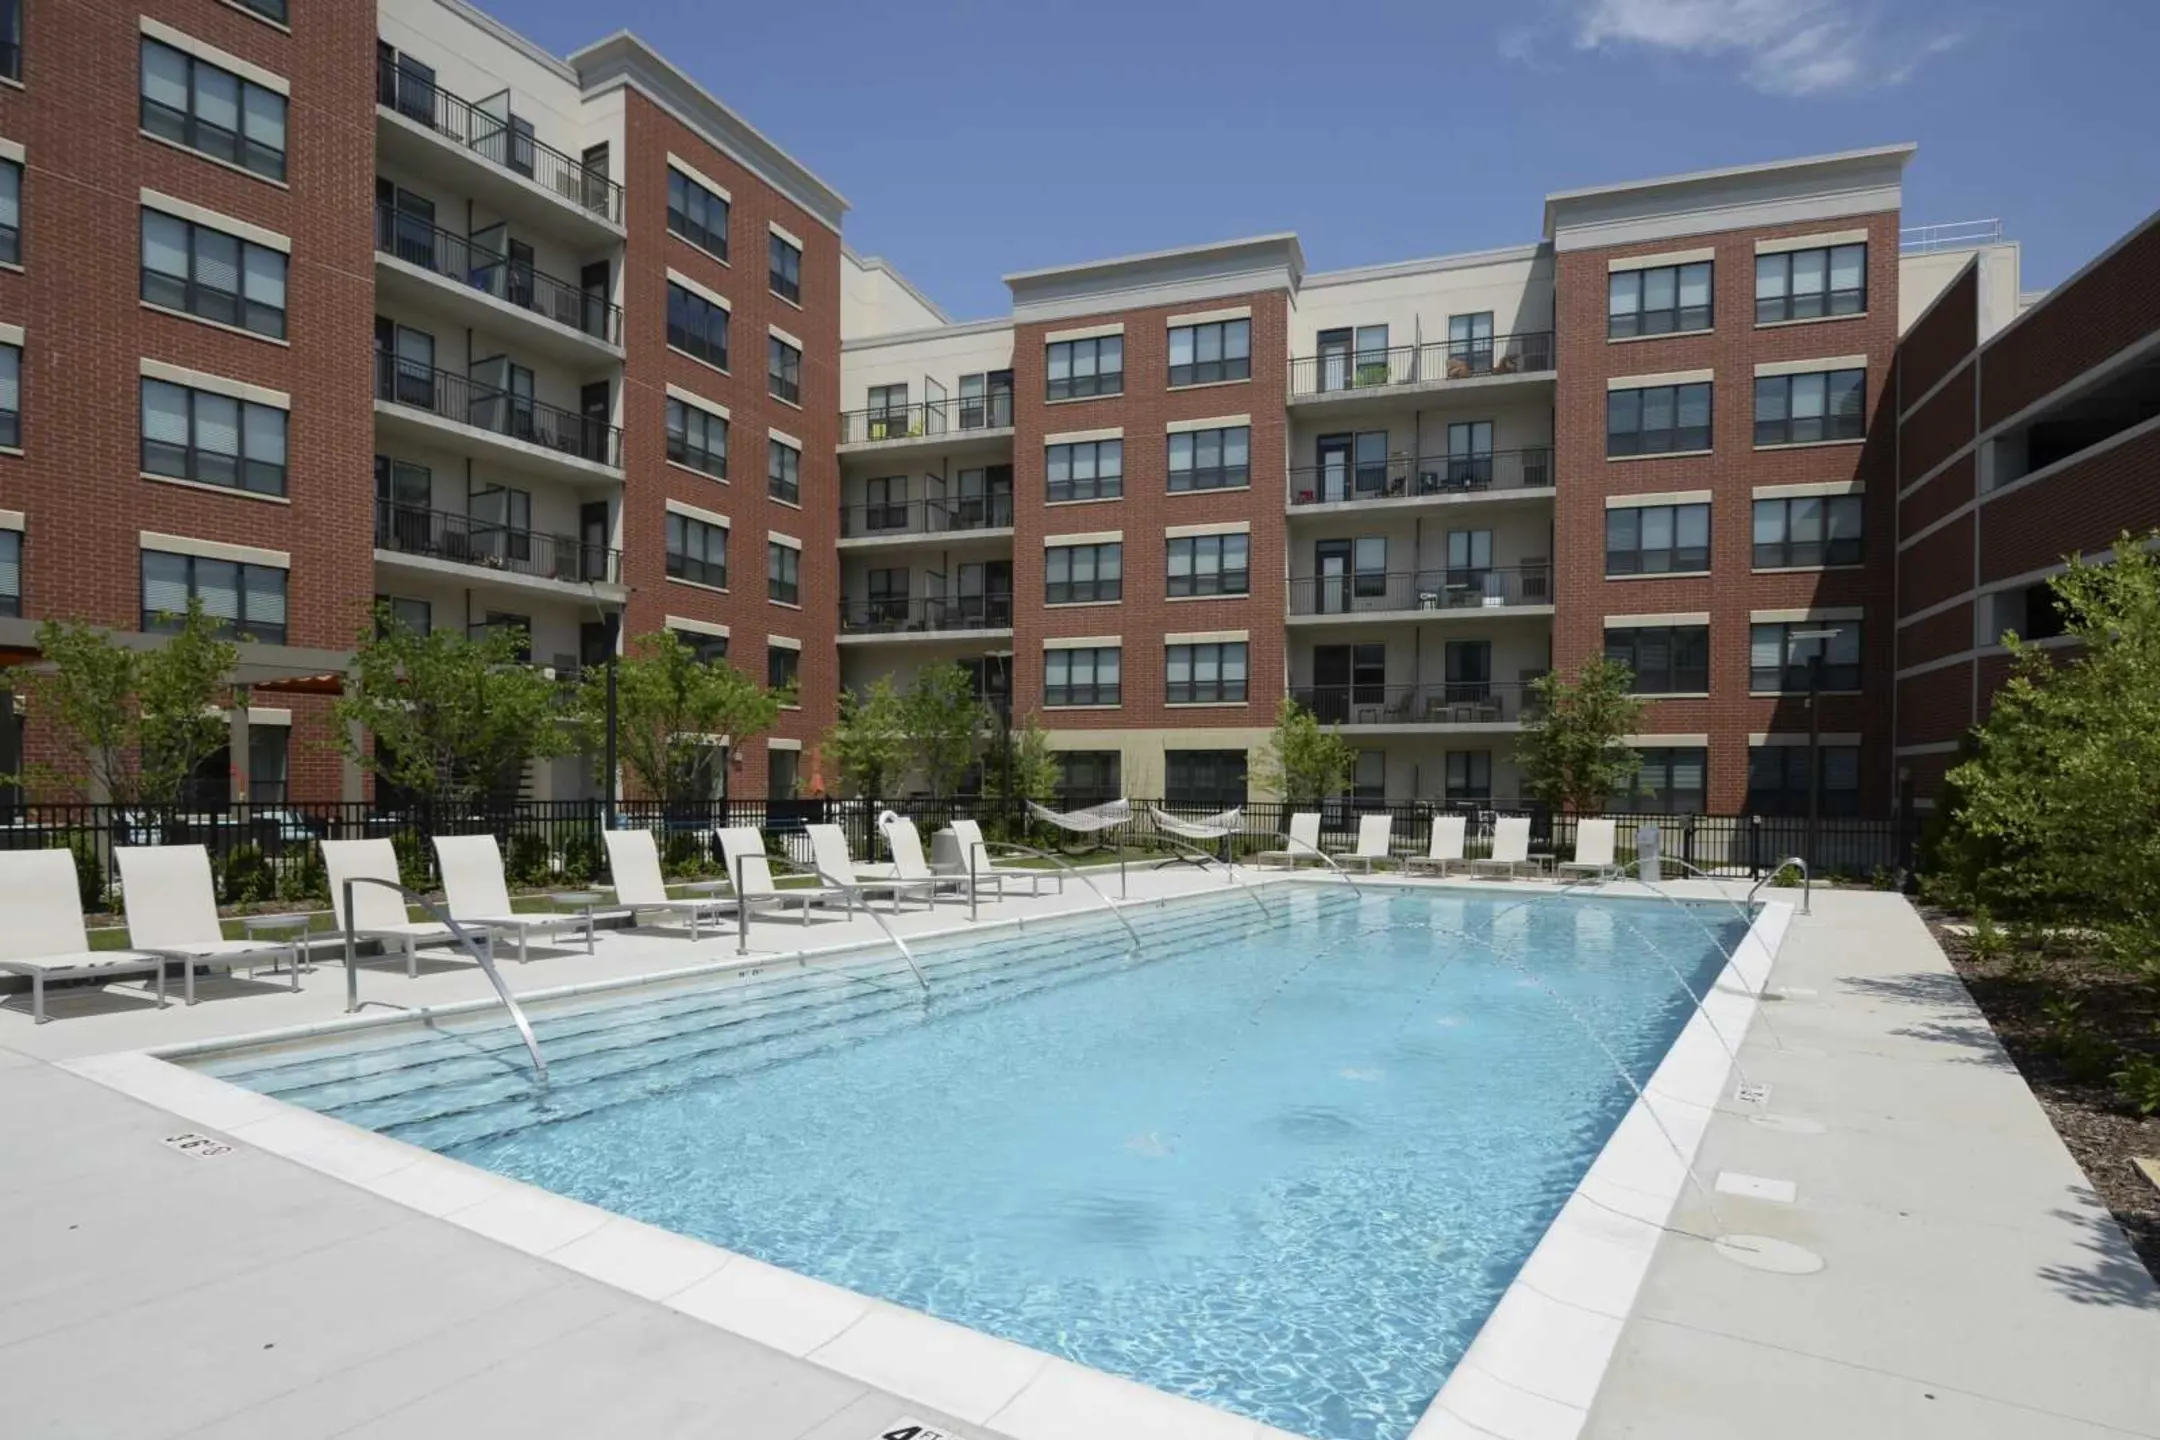 Pool - Ninety 7 Fifty On The Park Apartments - Orland Park, IL